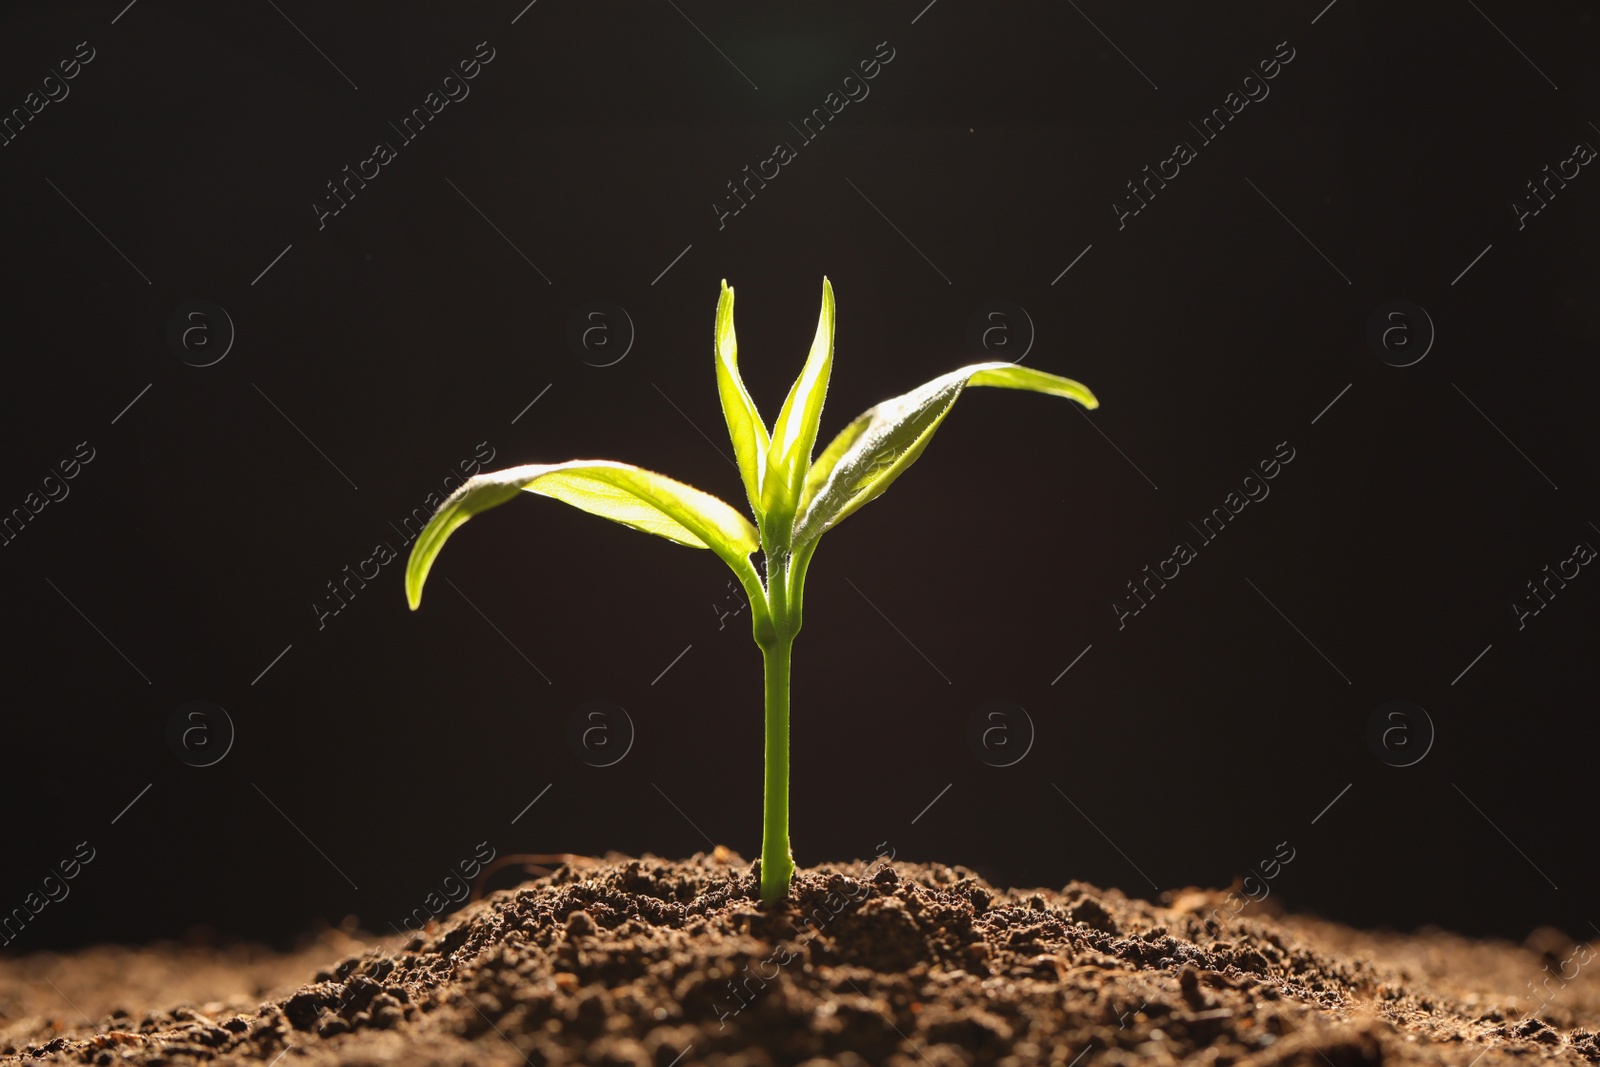 Photo of Young seedling in soil on black background